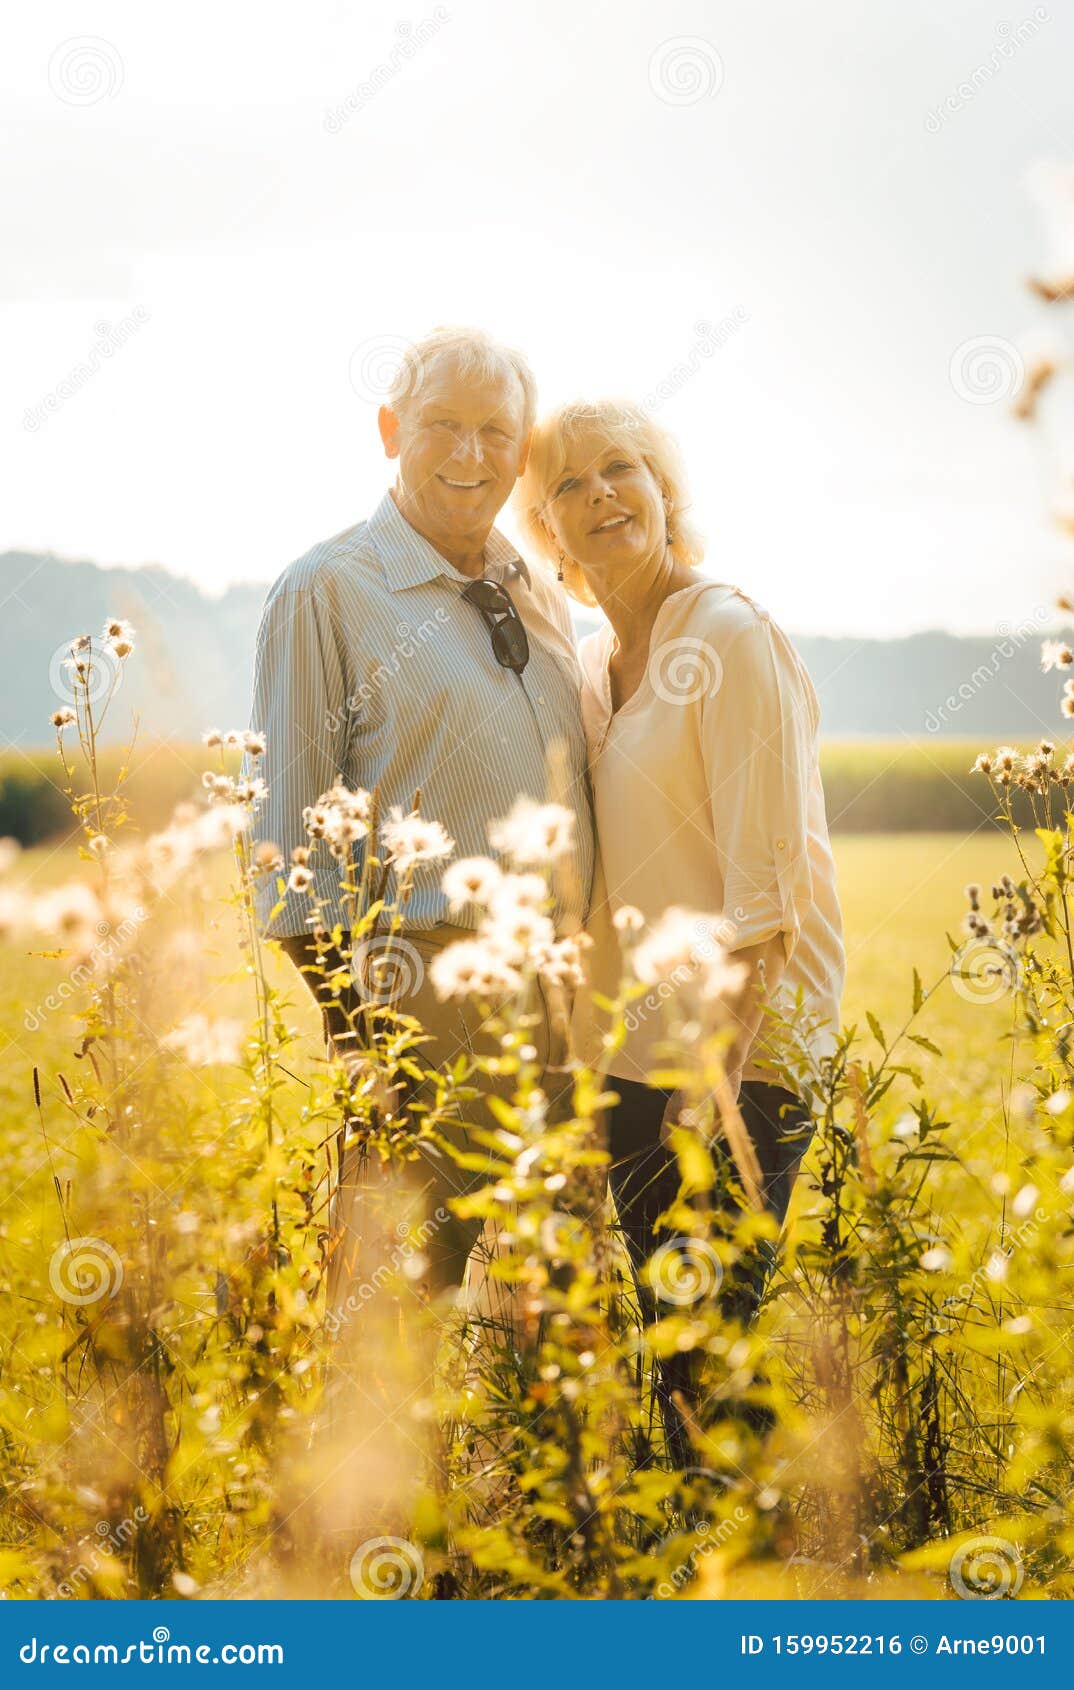 Senior Couple on a Sunlit Meadow Embracing Each Other Stock Photo